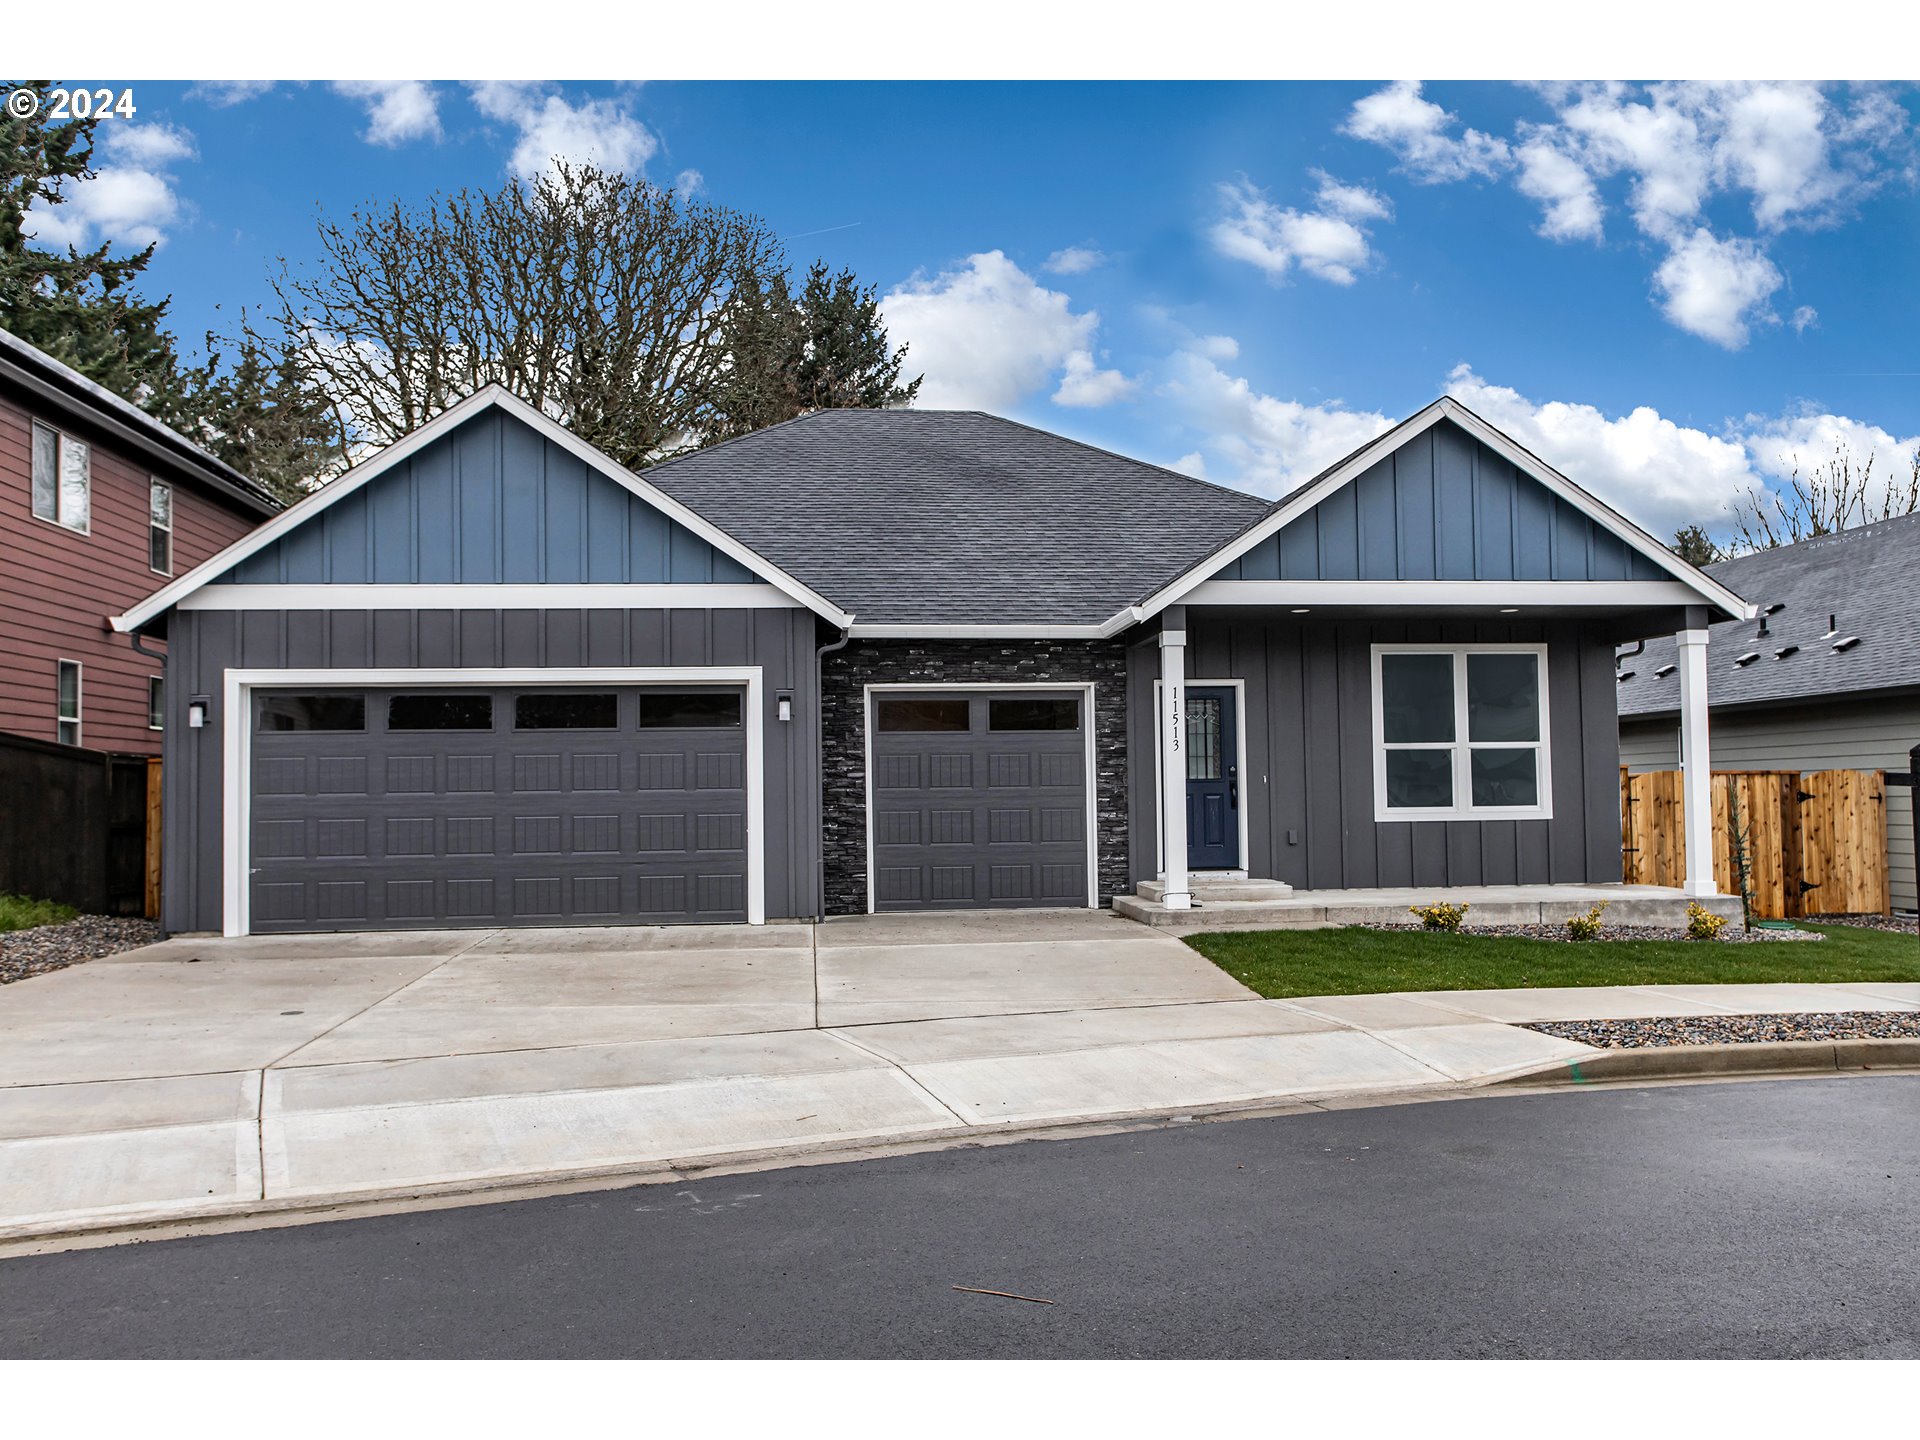 11513 NW 19TH AVE, Vancouver, WA 98685